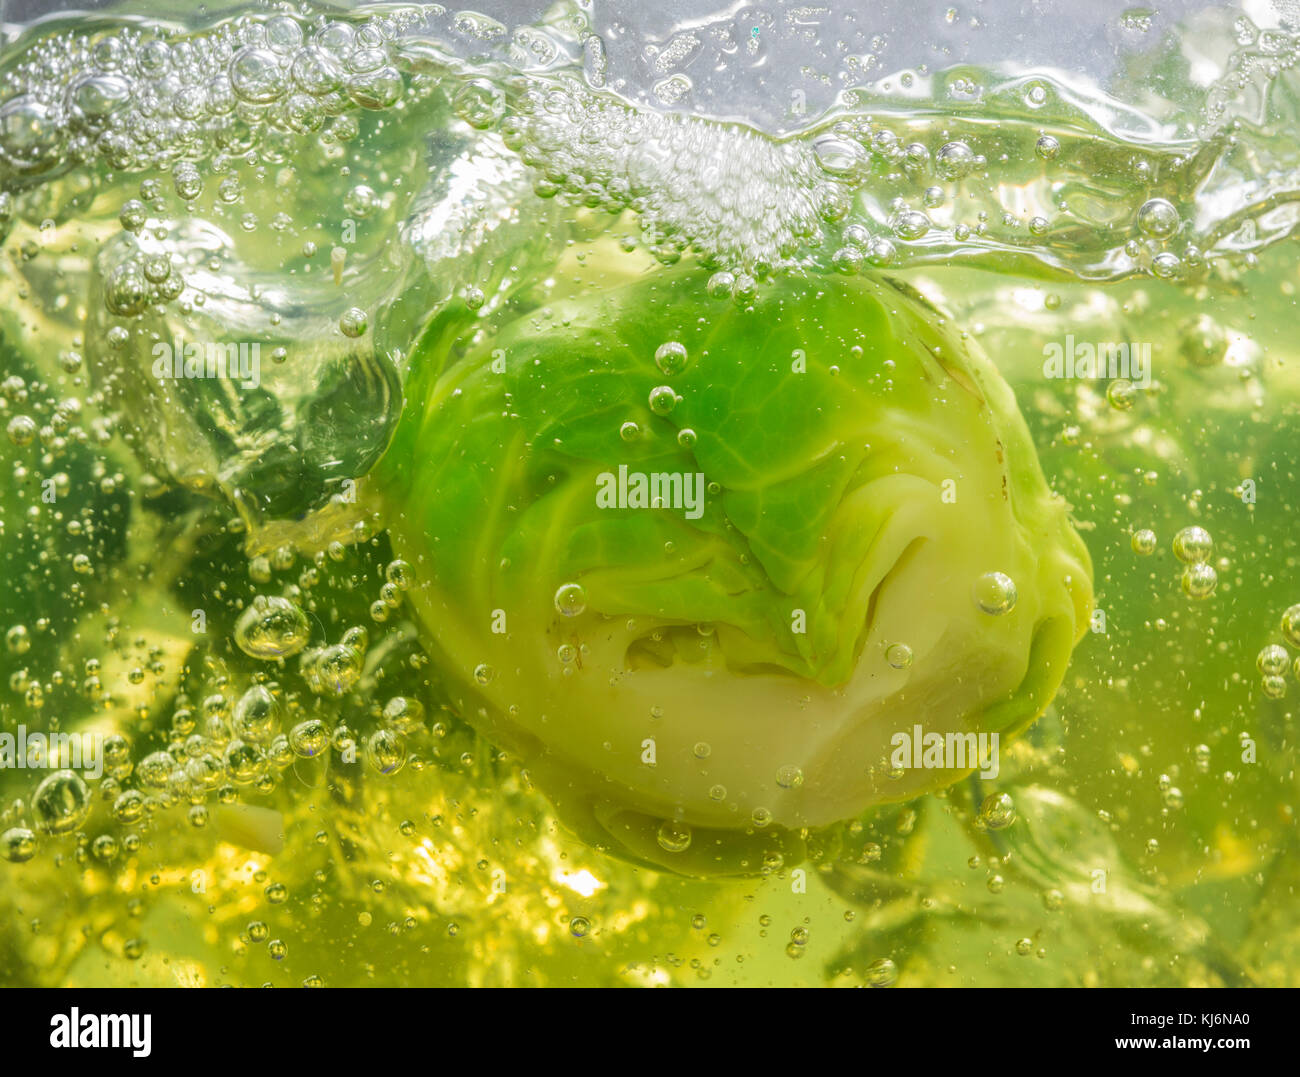 Brussels sprouts, brassica oleracea, cooking in a pot of boiling water. Stock Photo